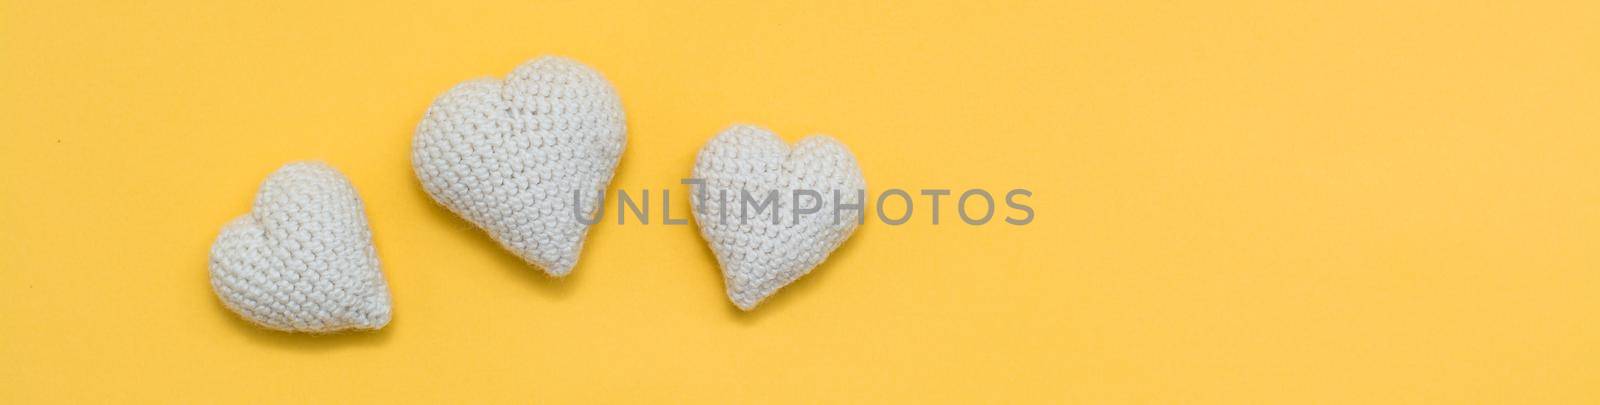 Handmade for Valentine's Day. Knitted white hearts on a yellow background. Web banner by Aleruana